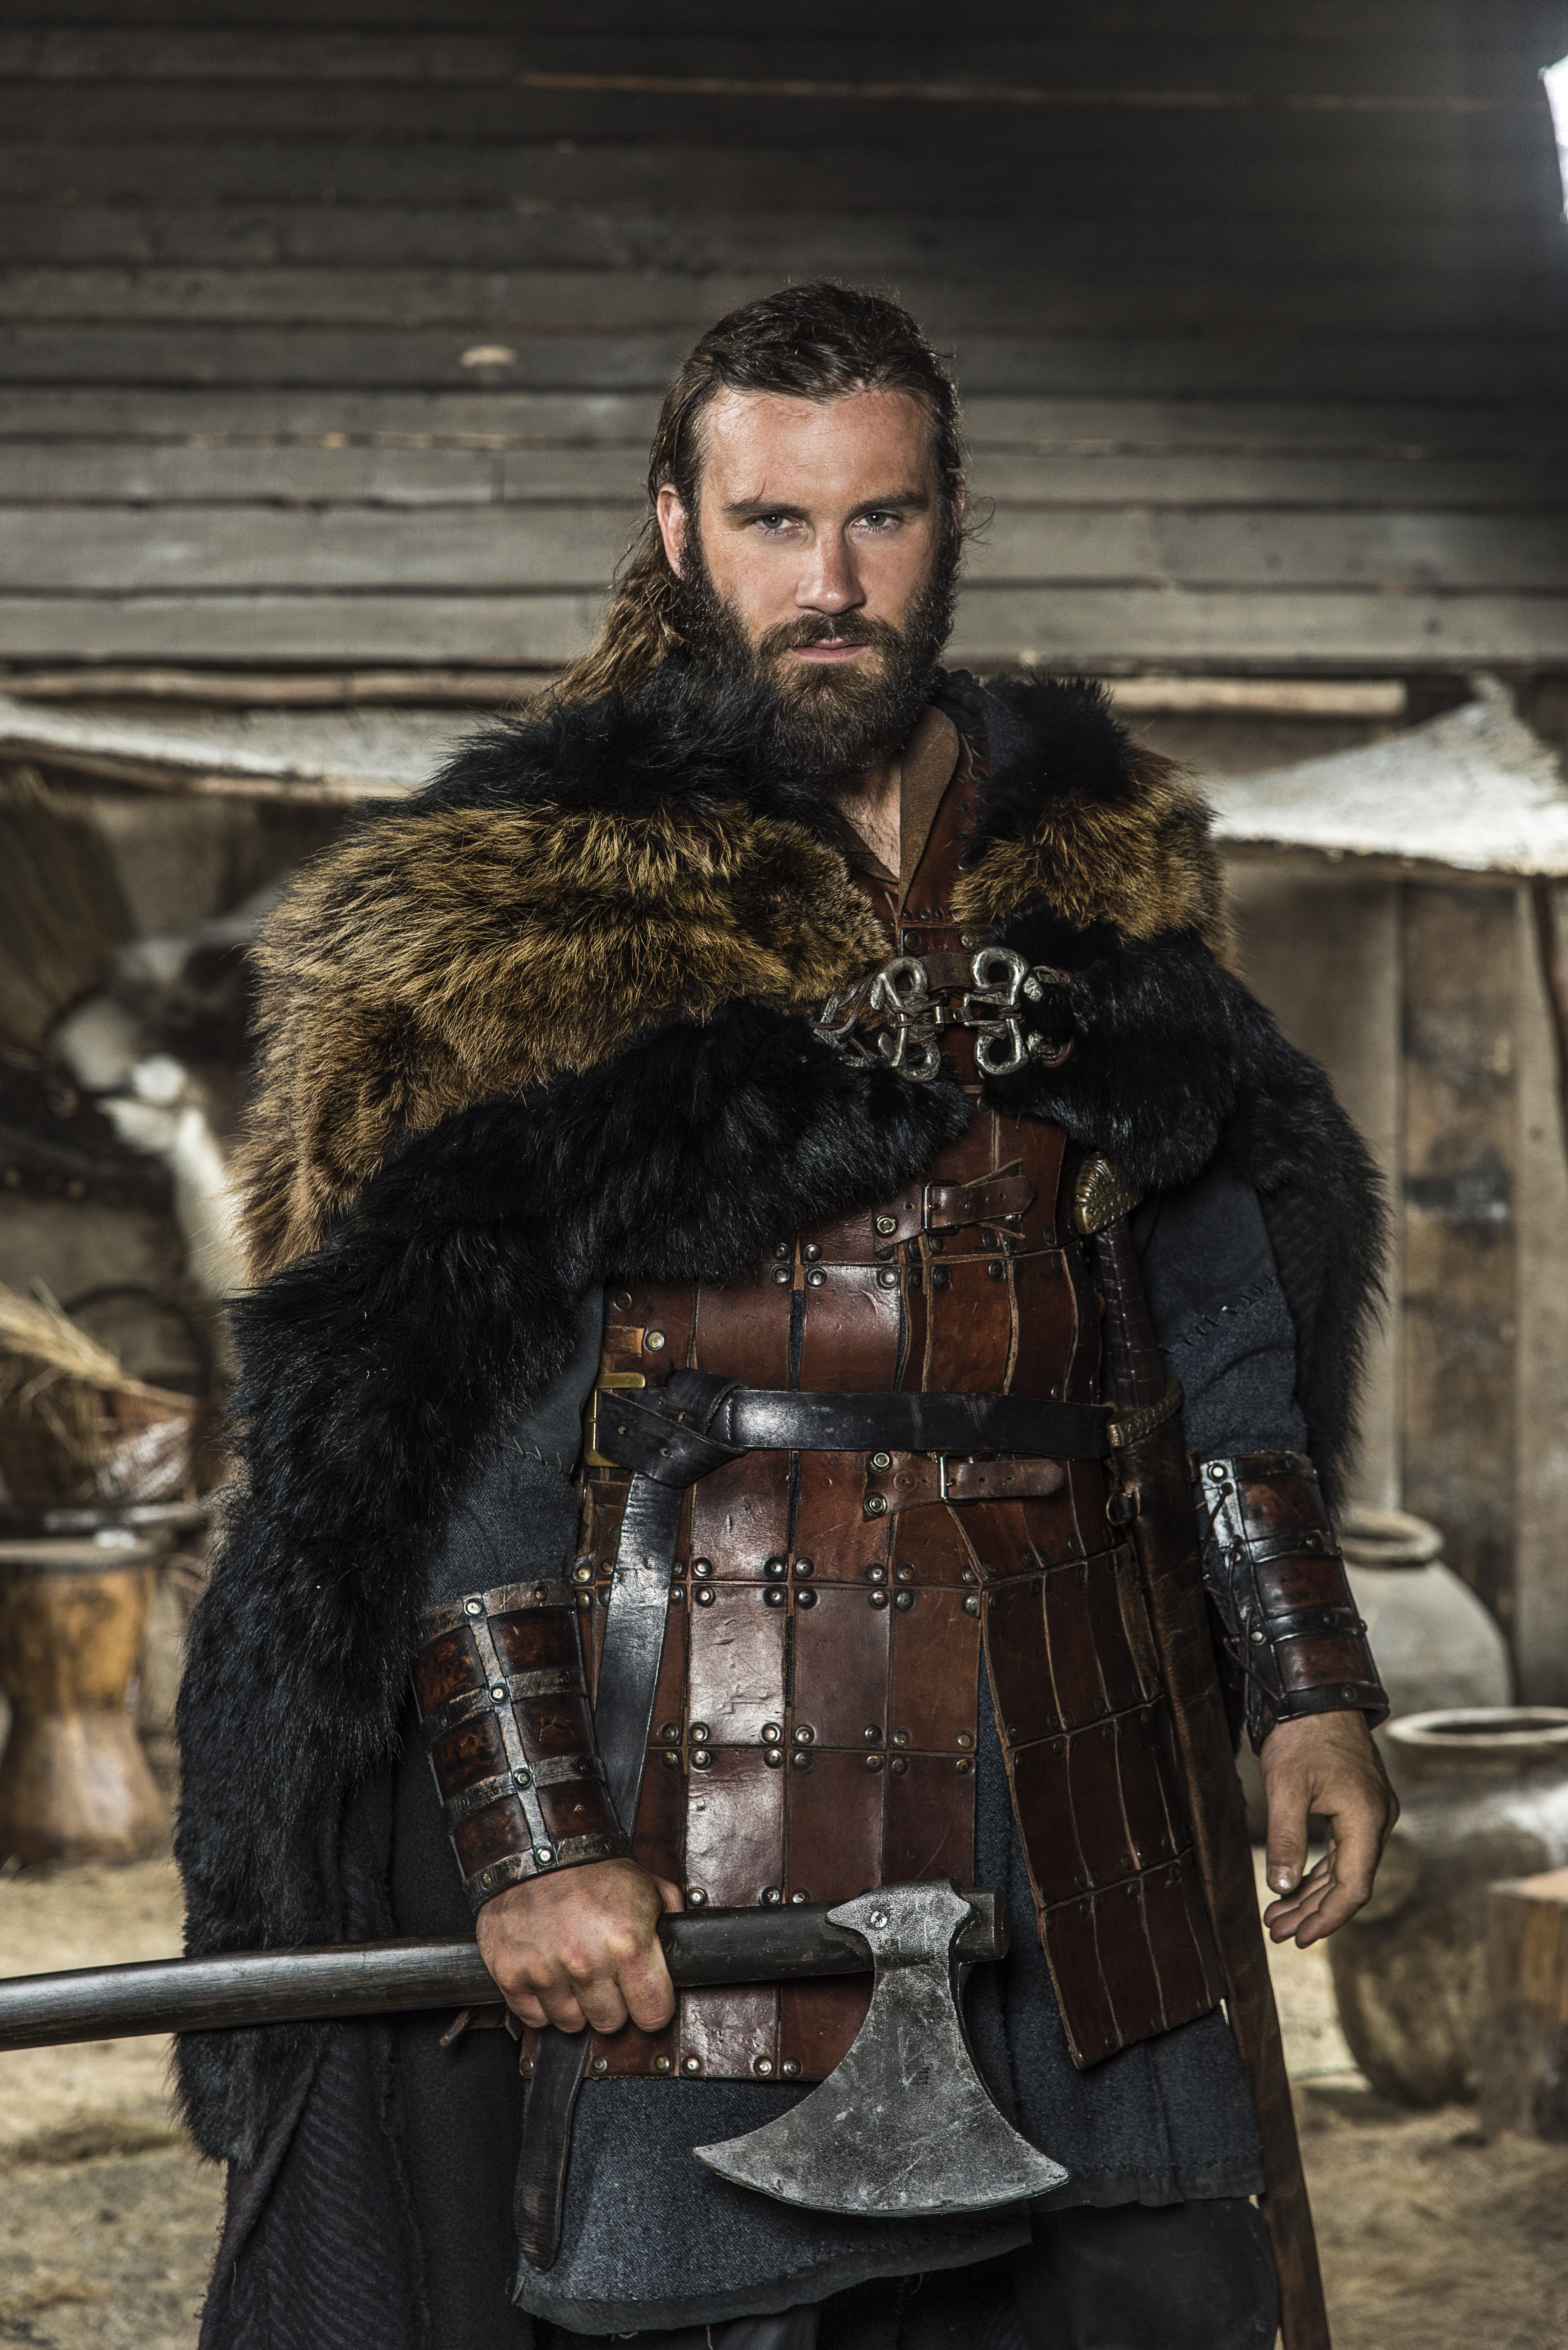 Clive Standen, Vikings Wiki